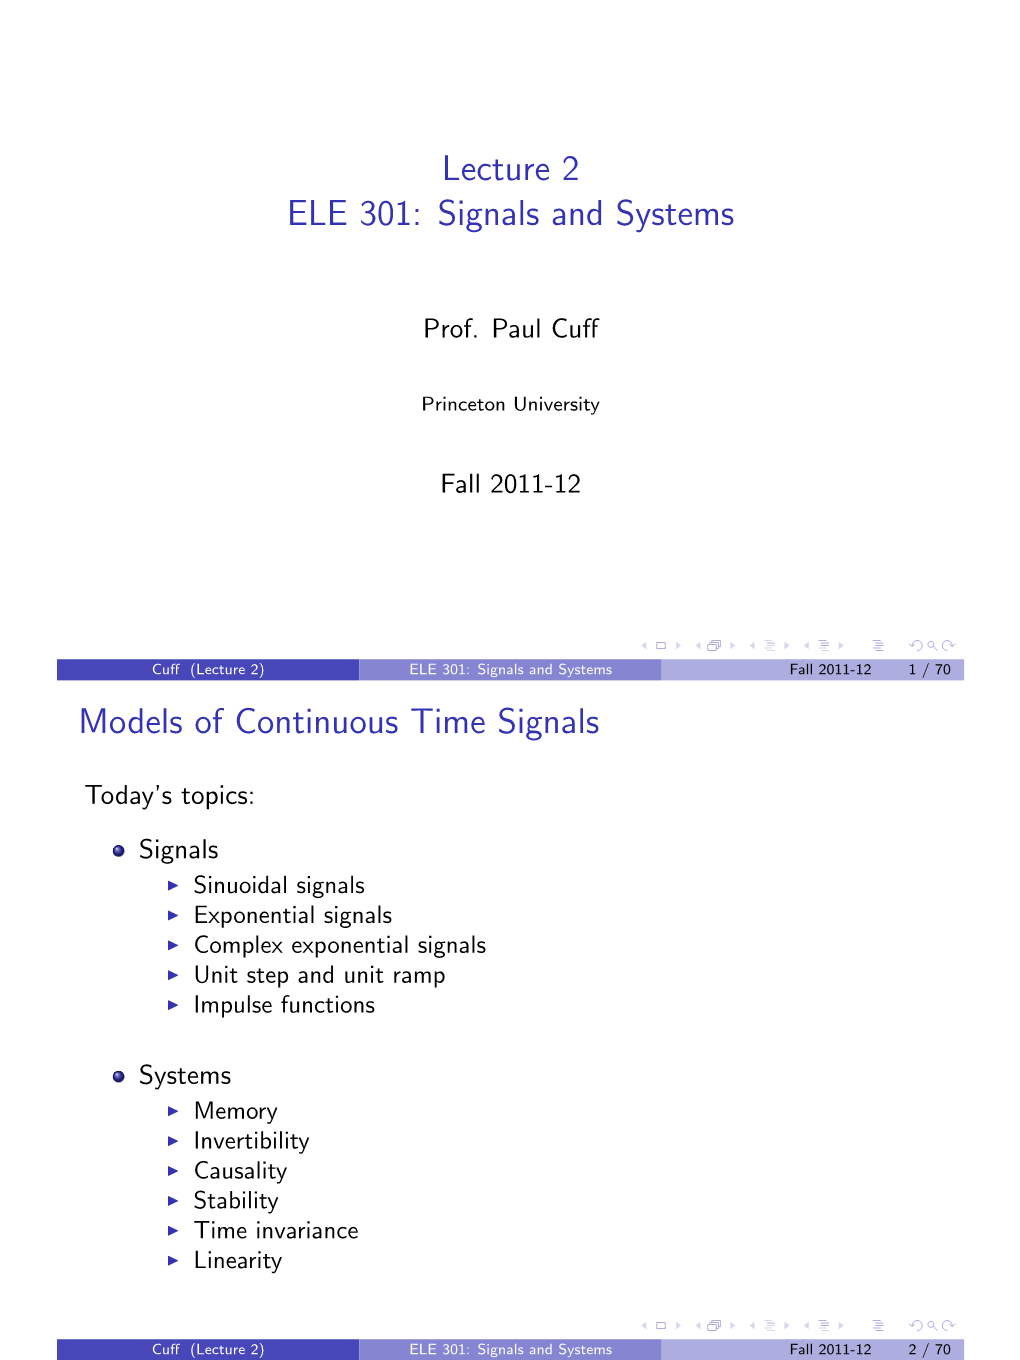 Lecture 2 ELE 301: Signals and Systems